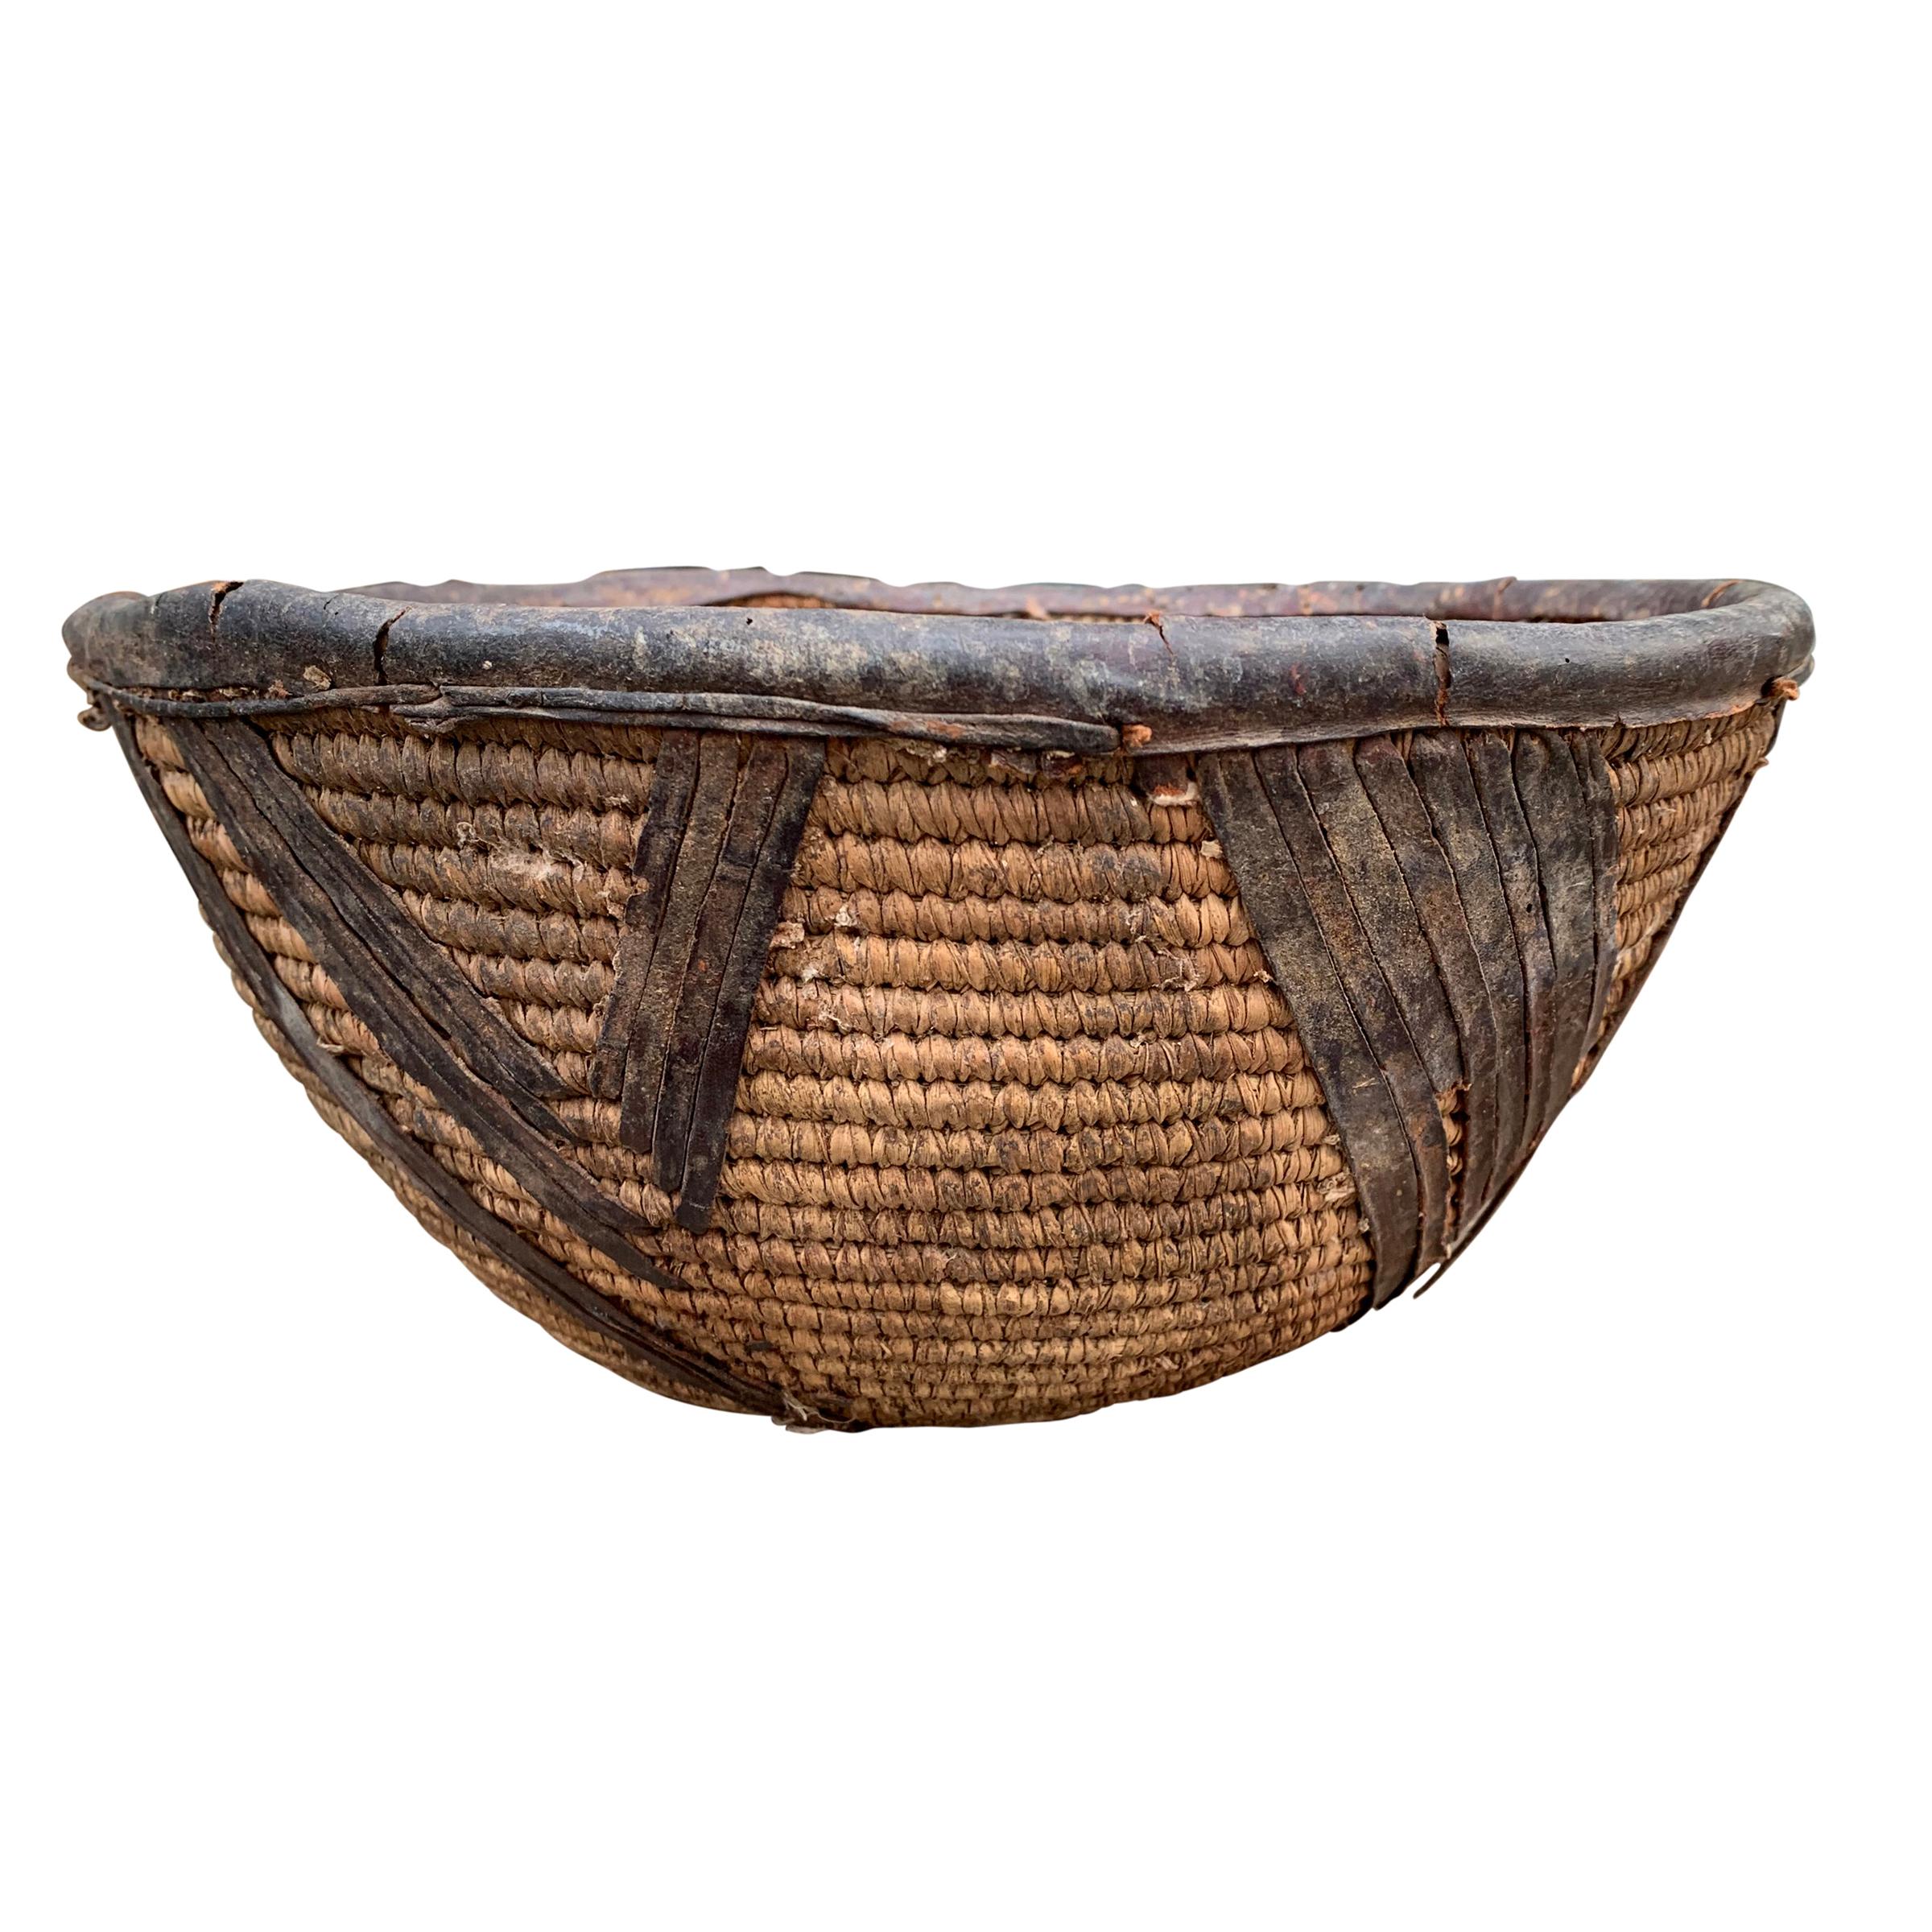 A simple, but chic, early 20th century woven natural fiber basket from the Yoruba People of Nigeria, with leather rim and decorative leather embellishments around the exterior.